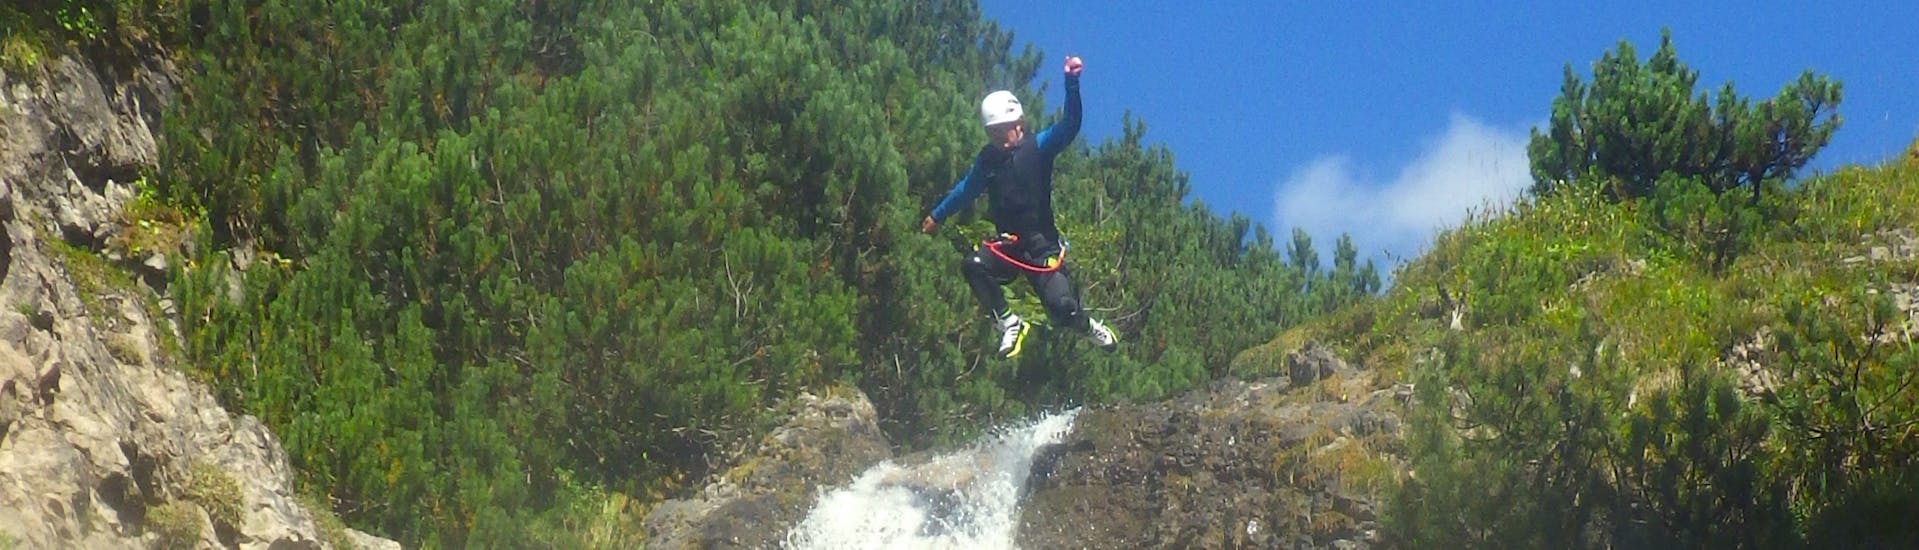 Private Canyoning Tour in the Hochalp Gorge or Wiesbach Gorge in Lechtal.